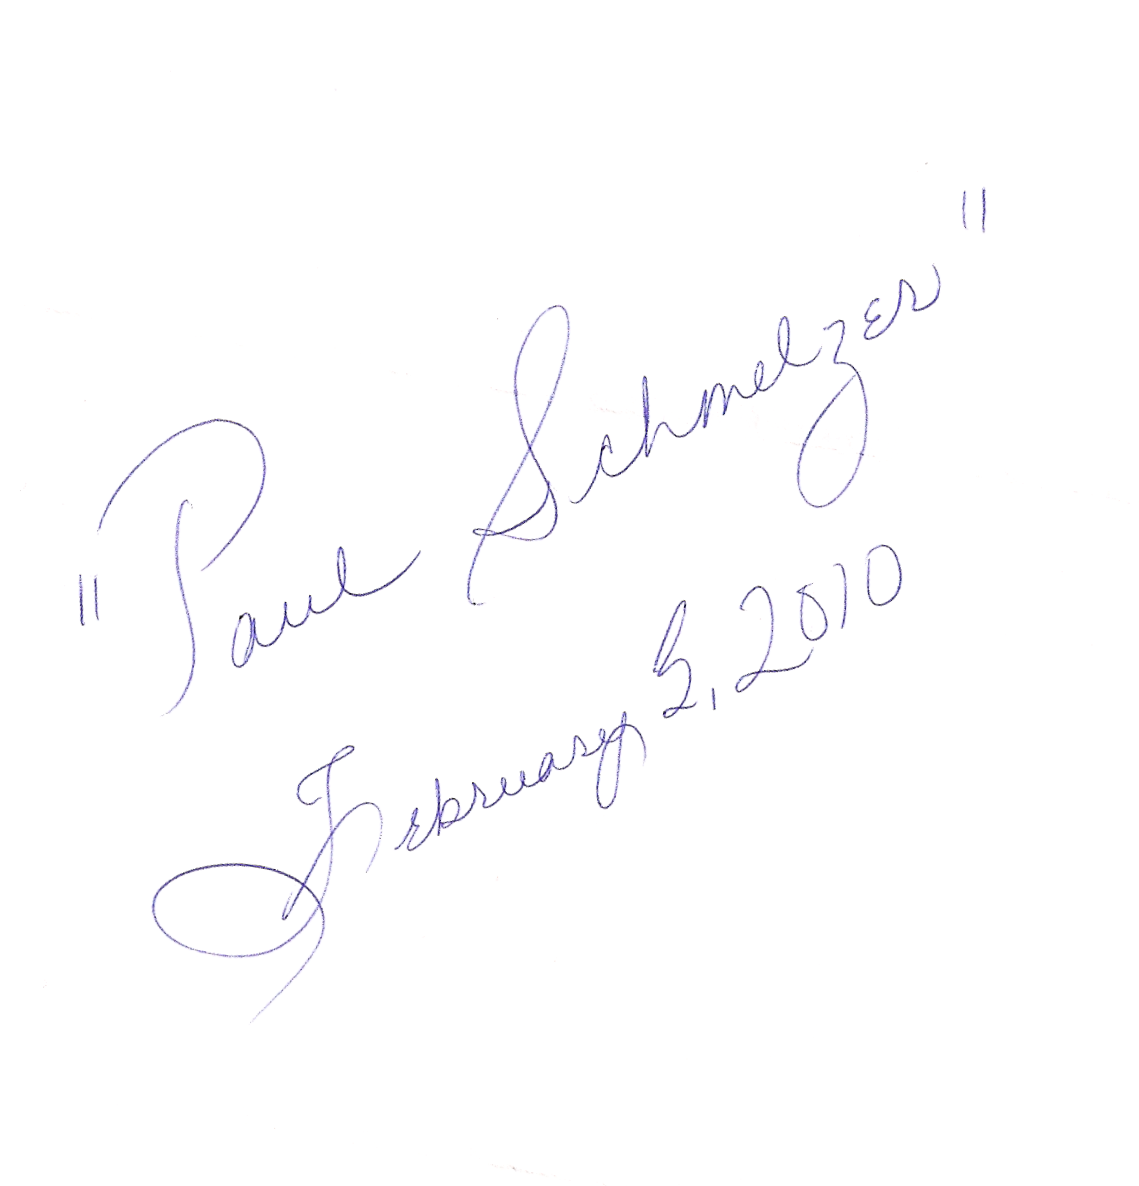  Paul Schmelzer as signed by US Rep. Michele Bachmann.&nbsp; 